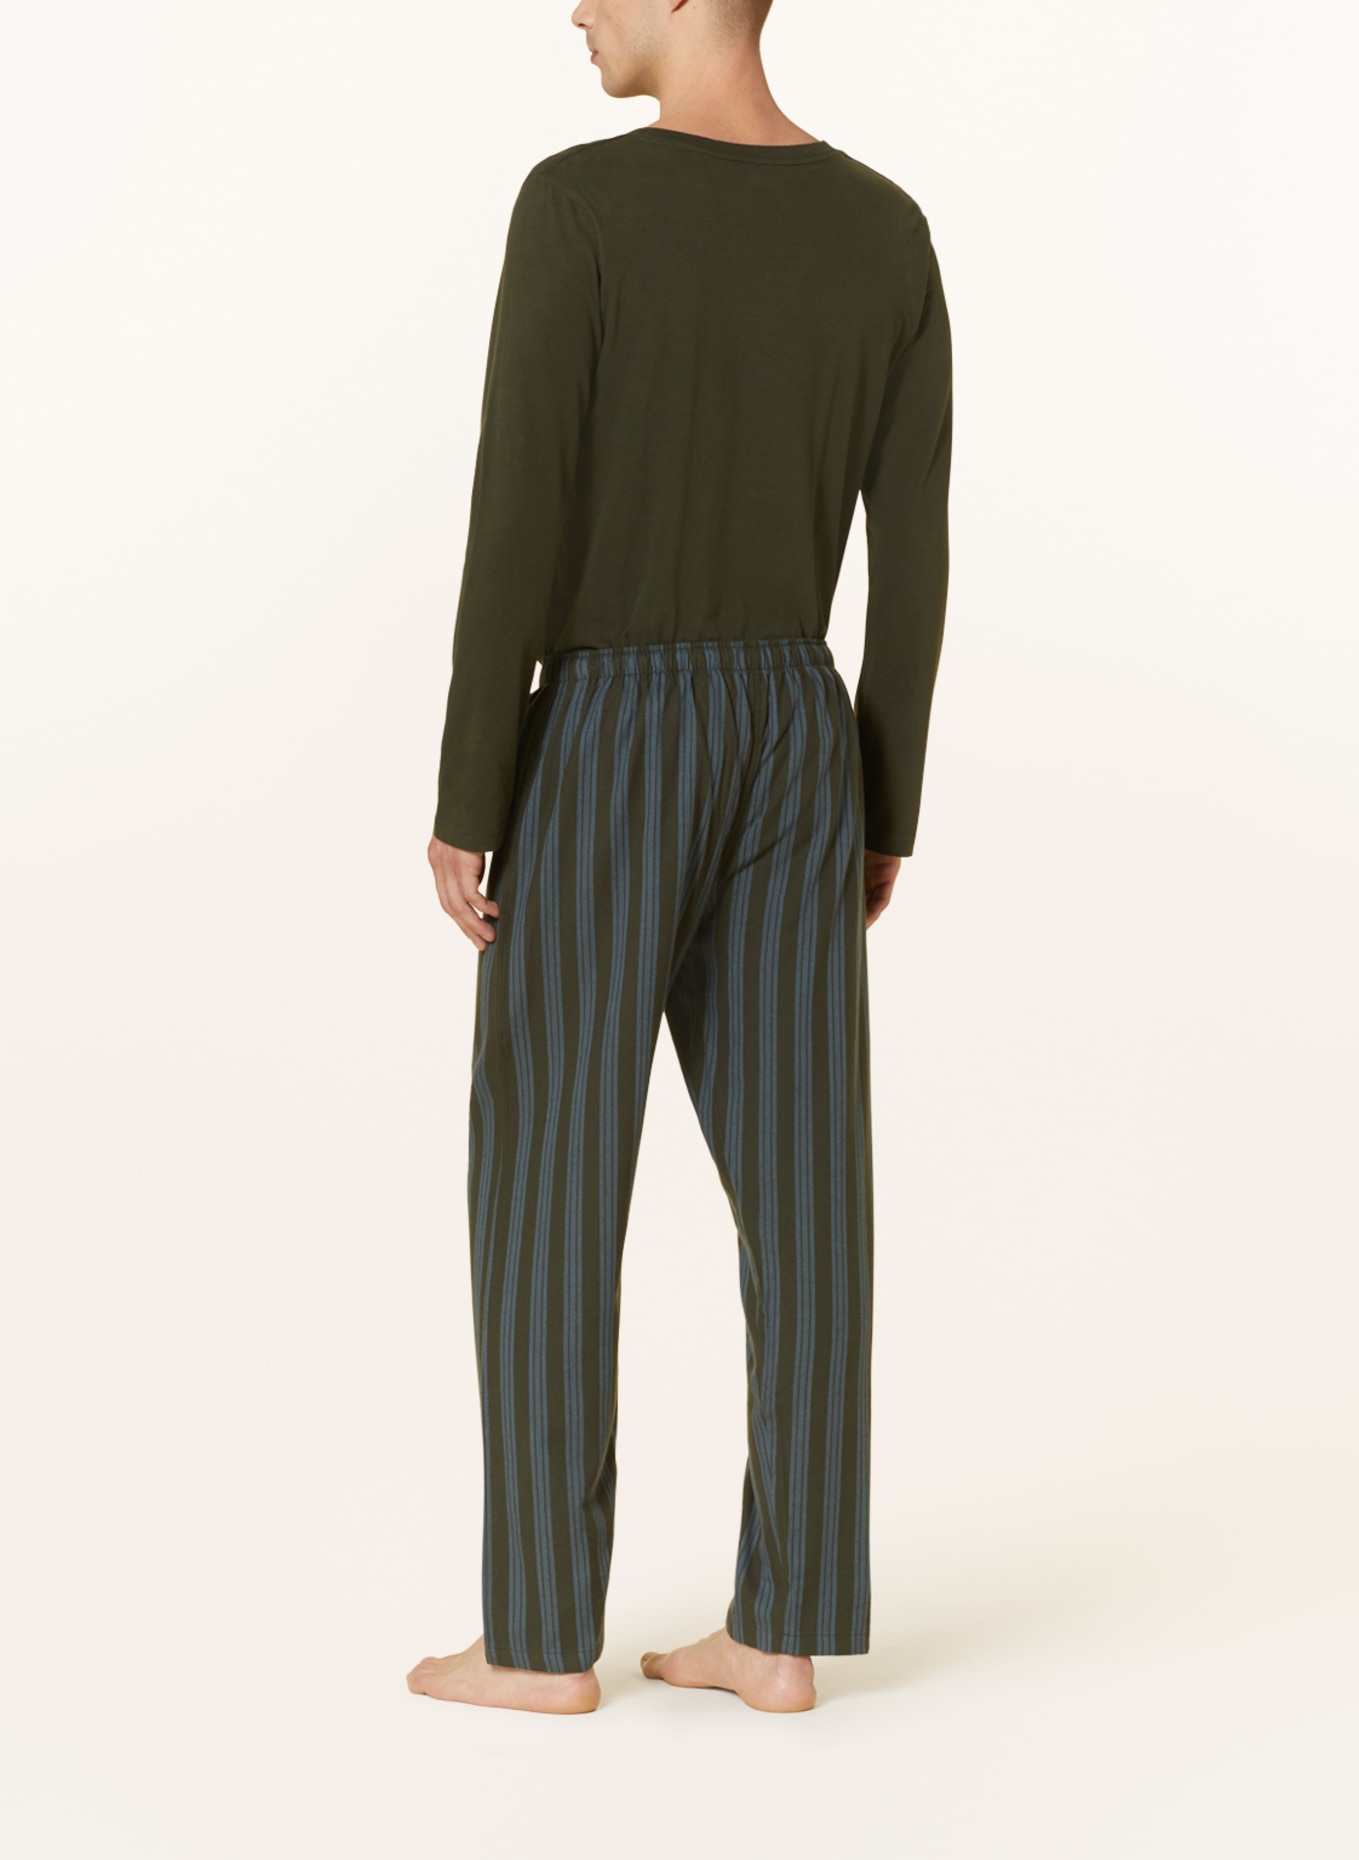 SCHIESSER Pajama pants MIX+RELAX, Color: OLIVE/ LIGHT BLUE (Image 3)